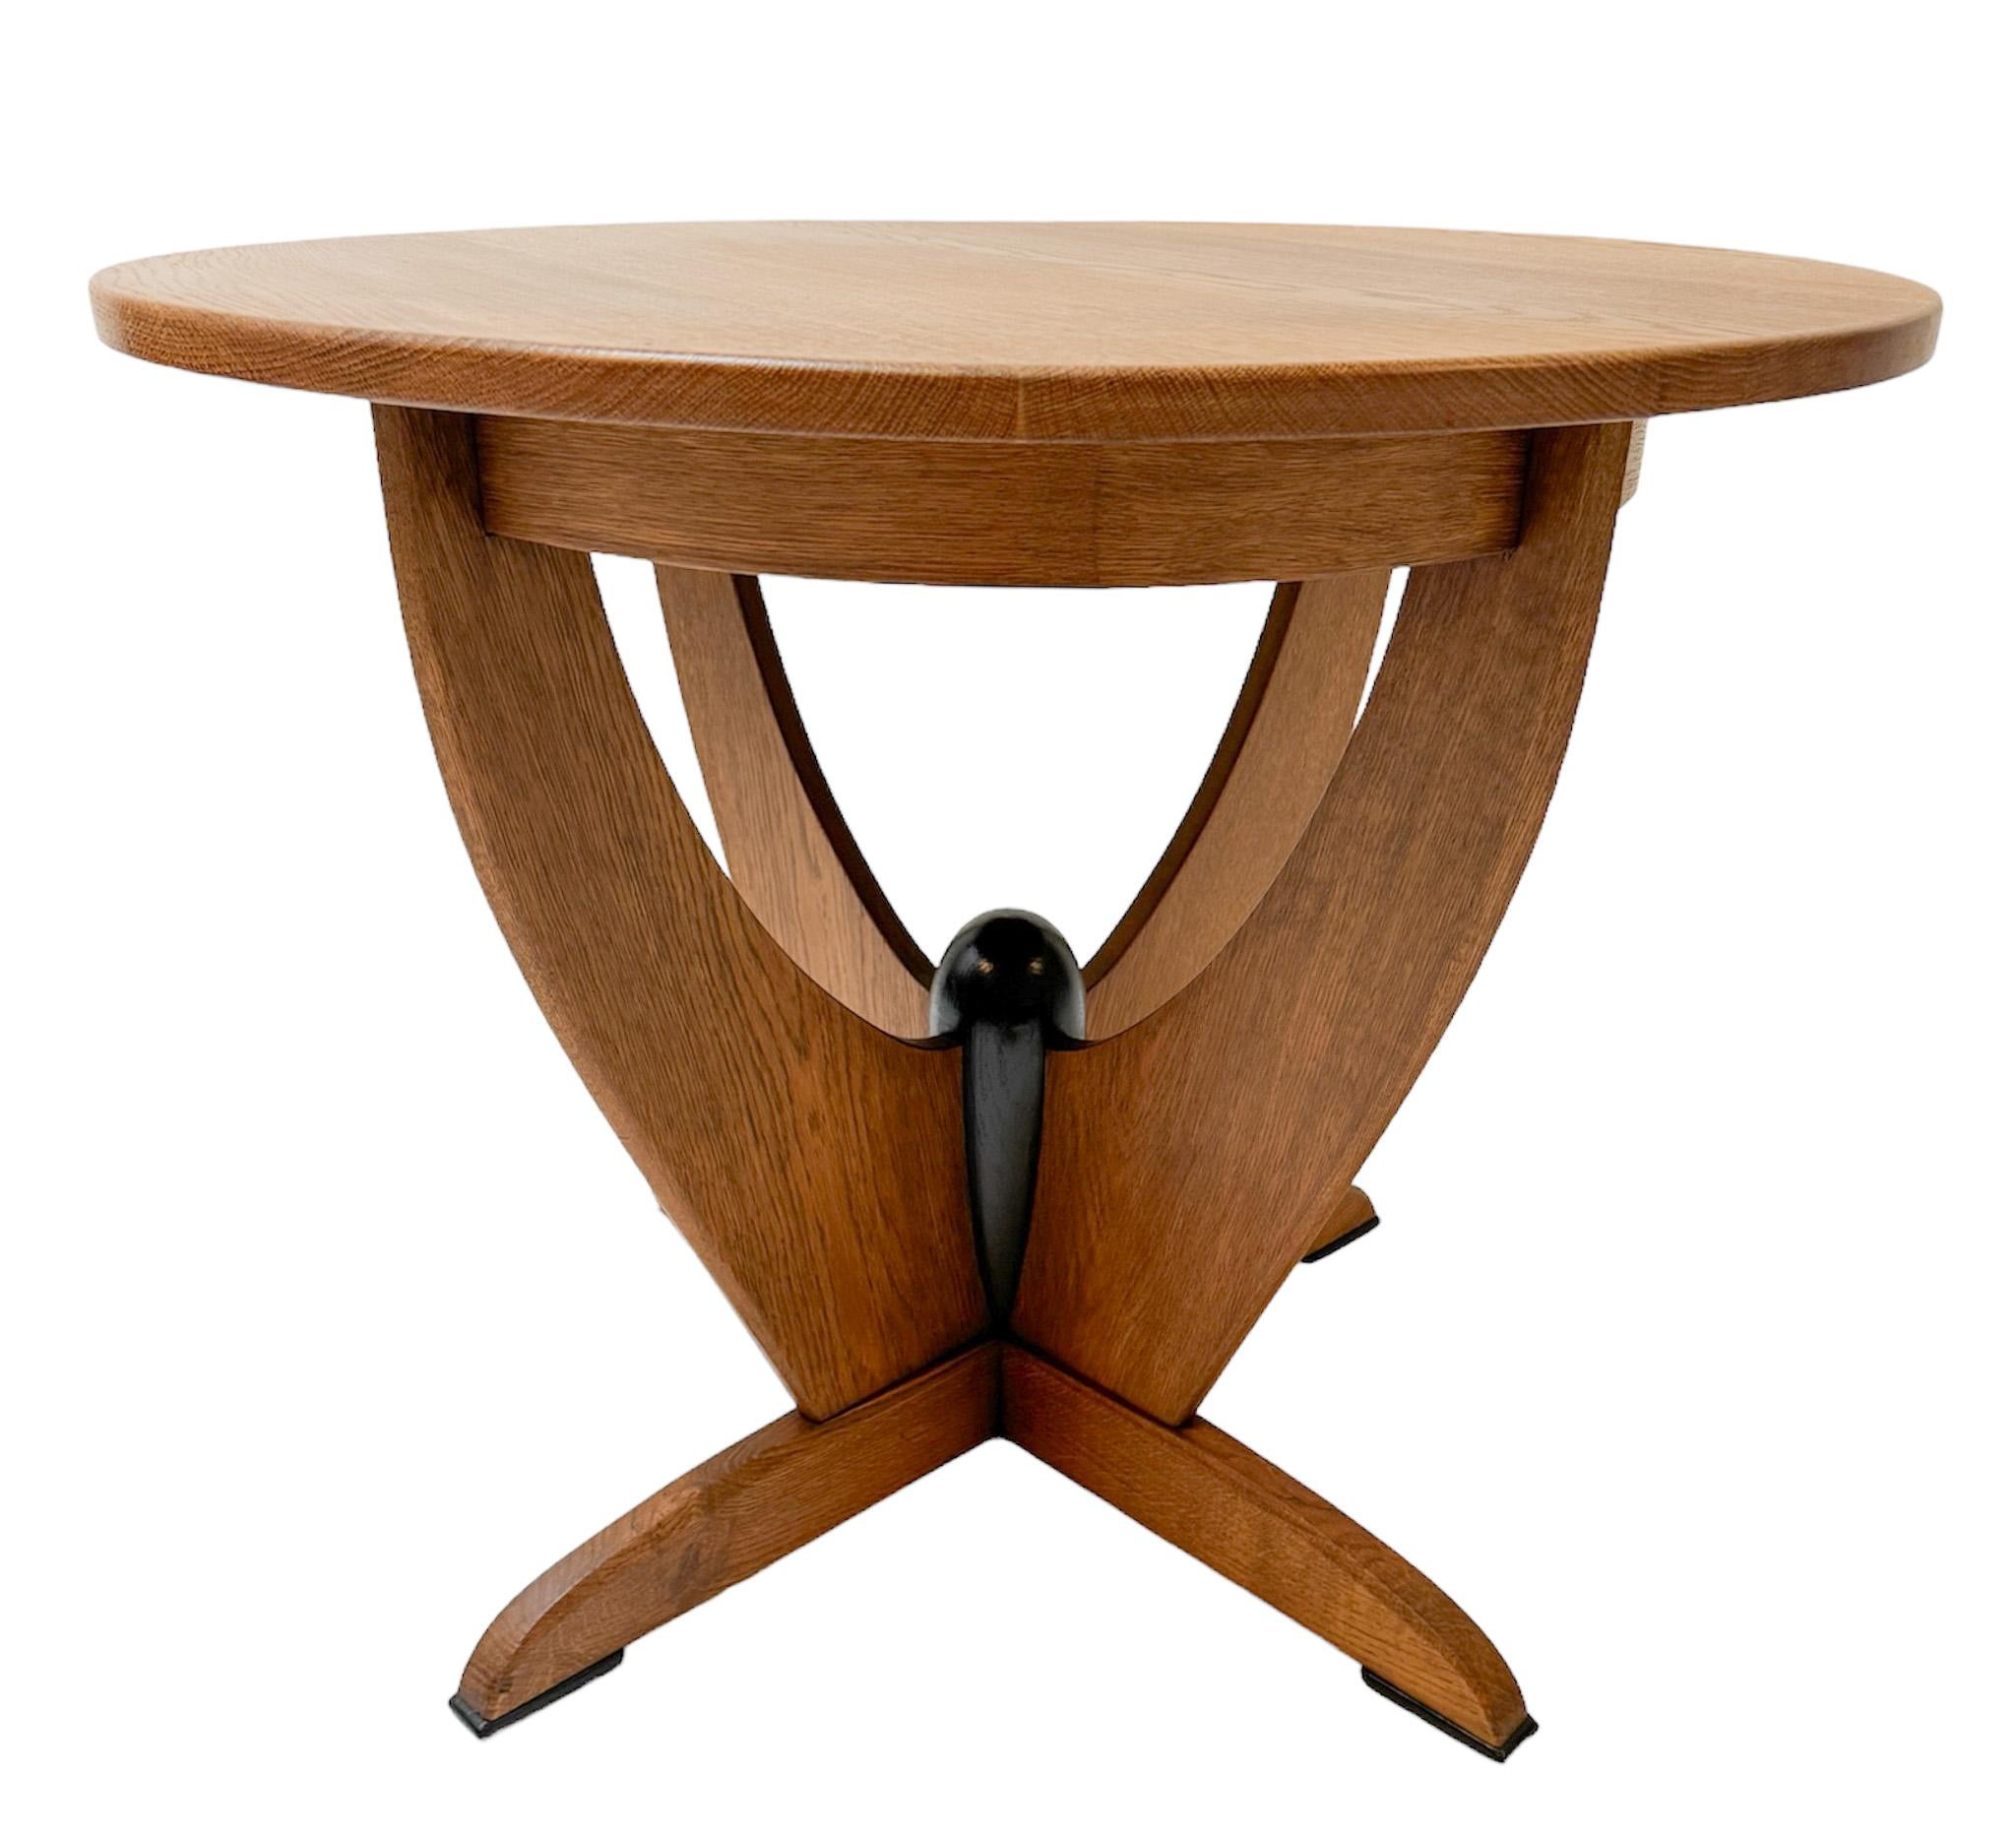 Magnificent and rare Art Deco Amsterdamse School center table.
Design by Paul Bromberg for Metz & Co. Amsterdam.
Striking Dutch design from the 1920s.
Solid oak base with original black lacquered elements.
Original solid oak round top.
This